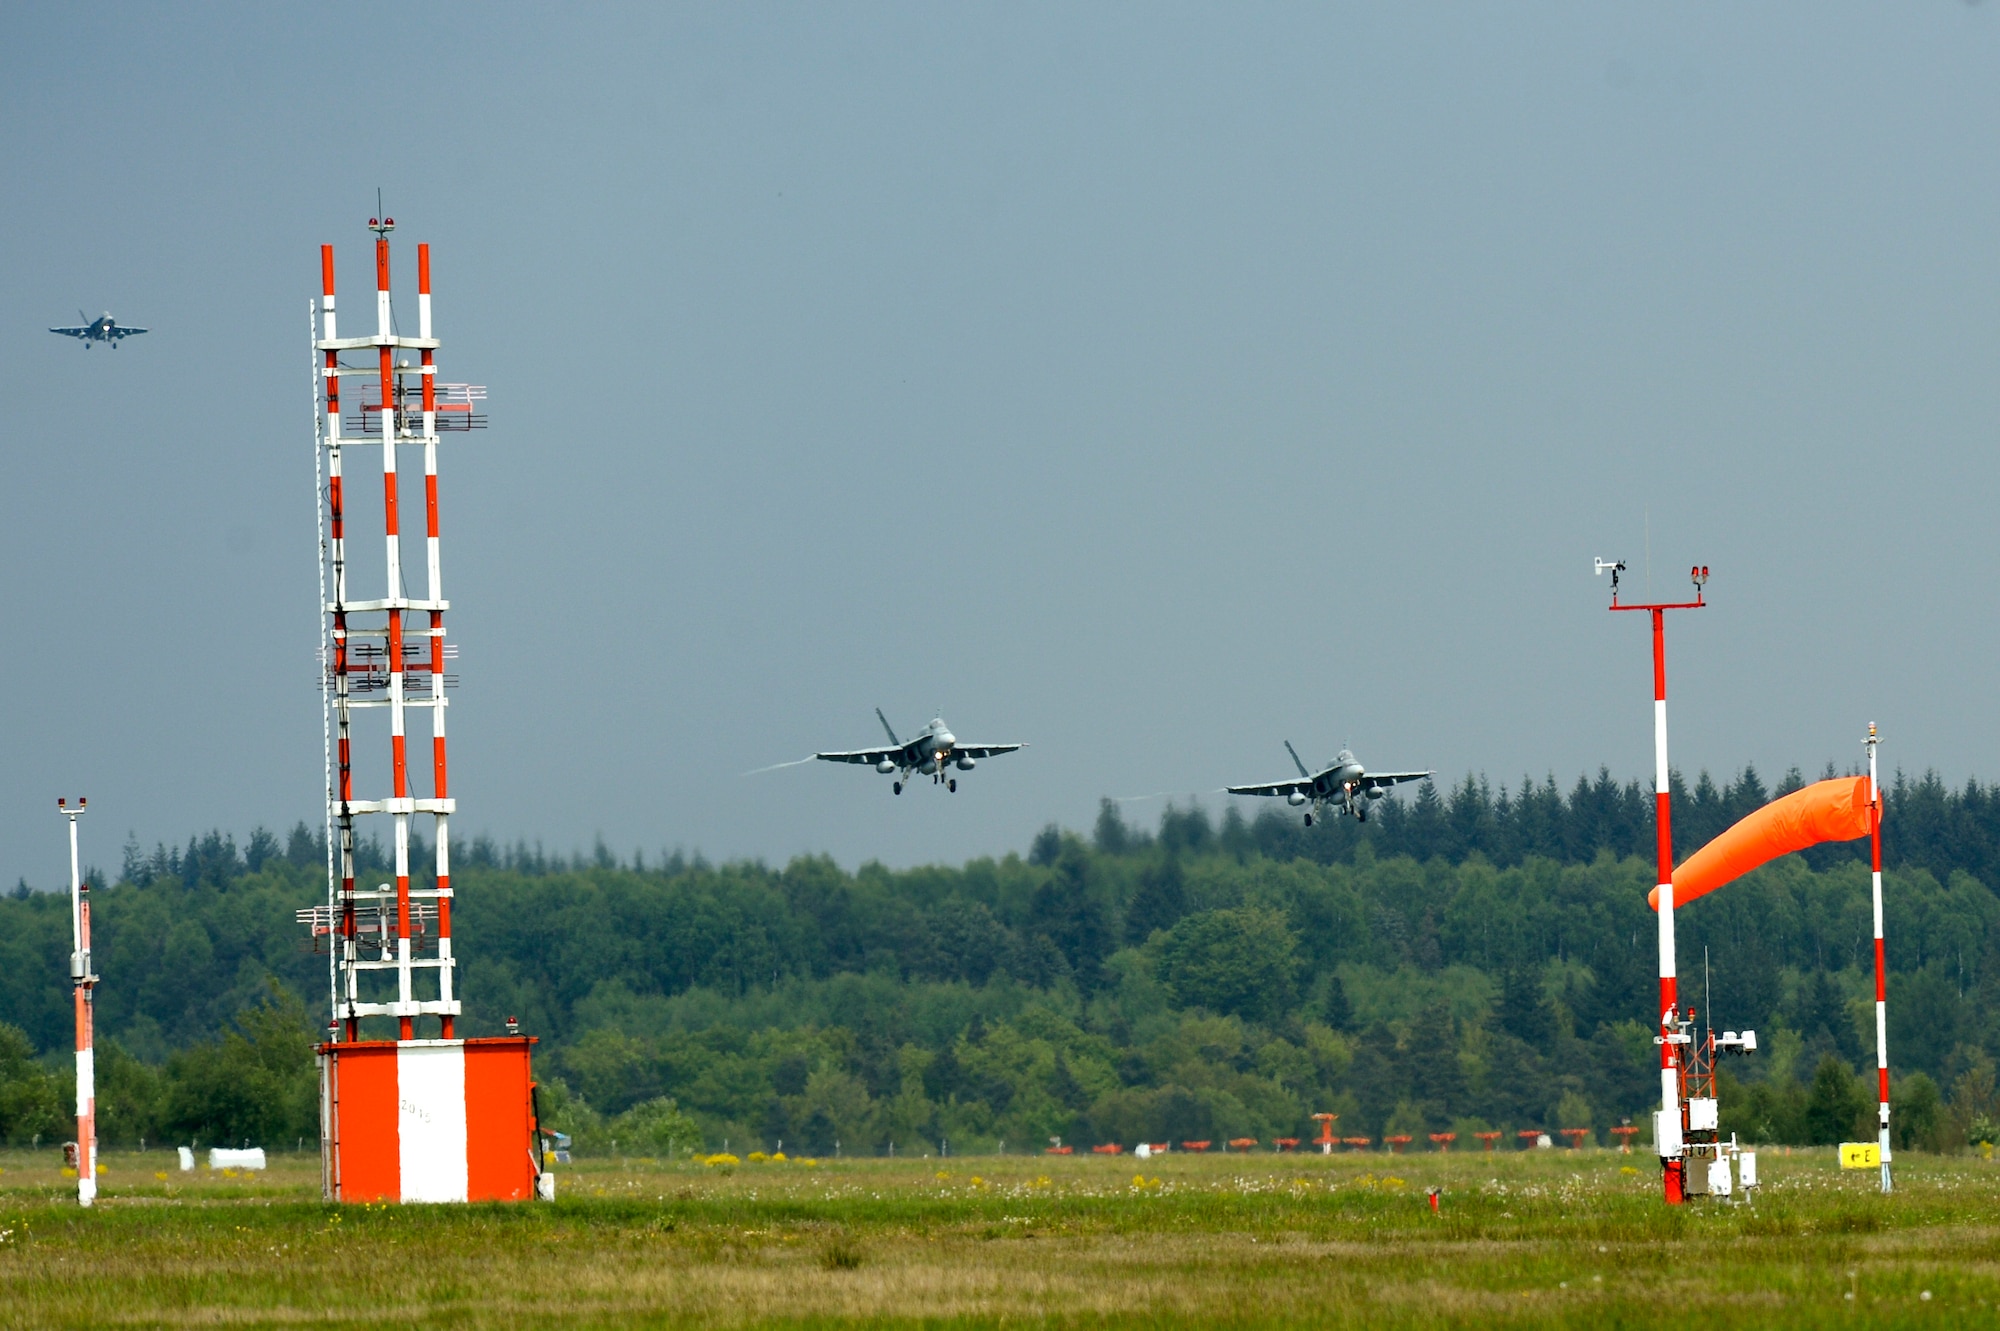 Royal Canadian Air Force CF-18 Hornet fighter aircraft pilots prepare to land on the flightline May 1, 2014, at Spangdahlem Air Base, Germany. The fighters came from the 425th Tactical Fighter Squadron based out of the RCAF’s 3rd Wing in Bagotville, Québec, as a part of NATO reassurance measures to Central and Eastern Europe. (U.S. Air Force photo by Senior Airman Rusty Frank/Released)